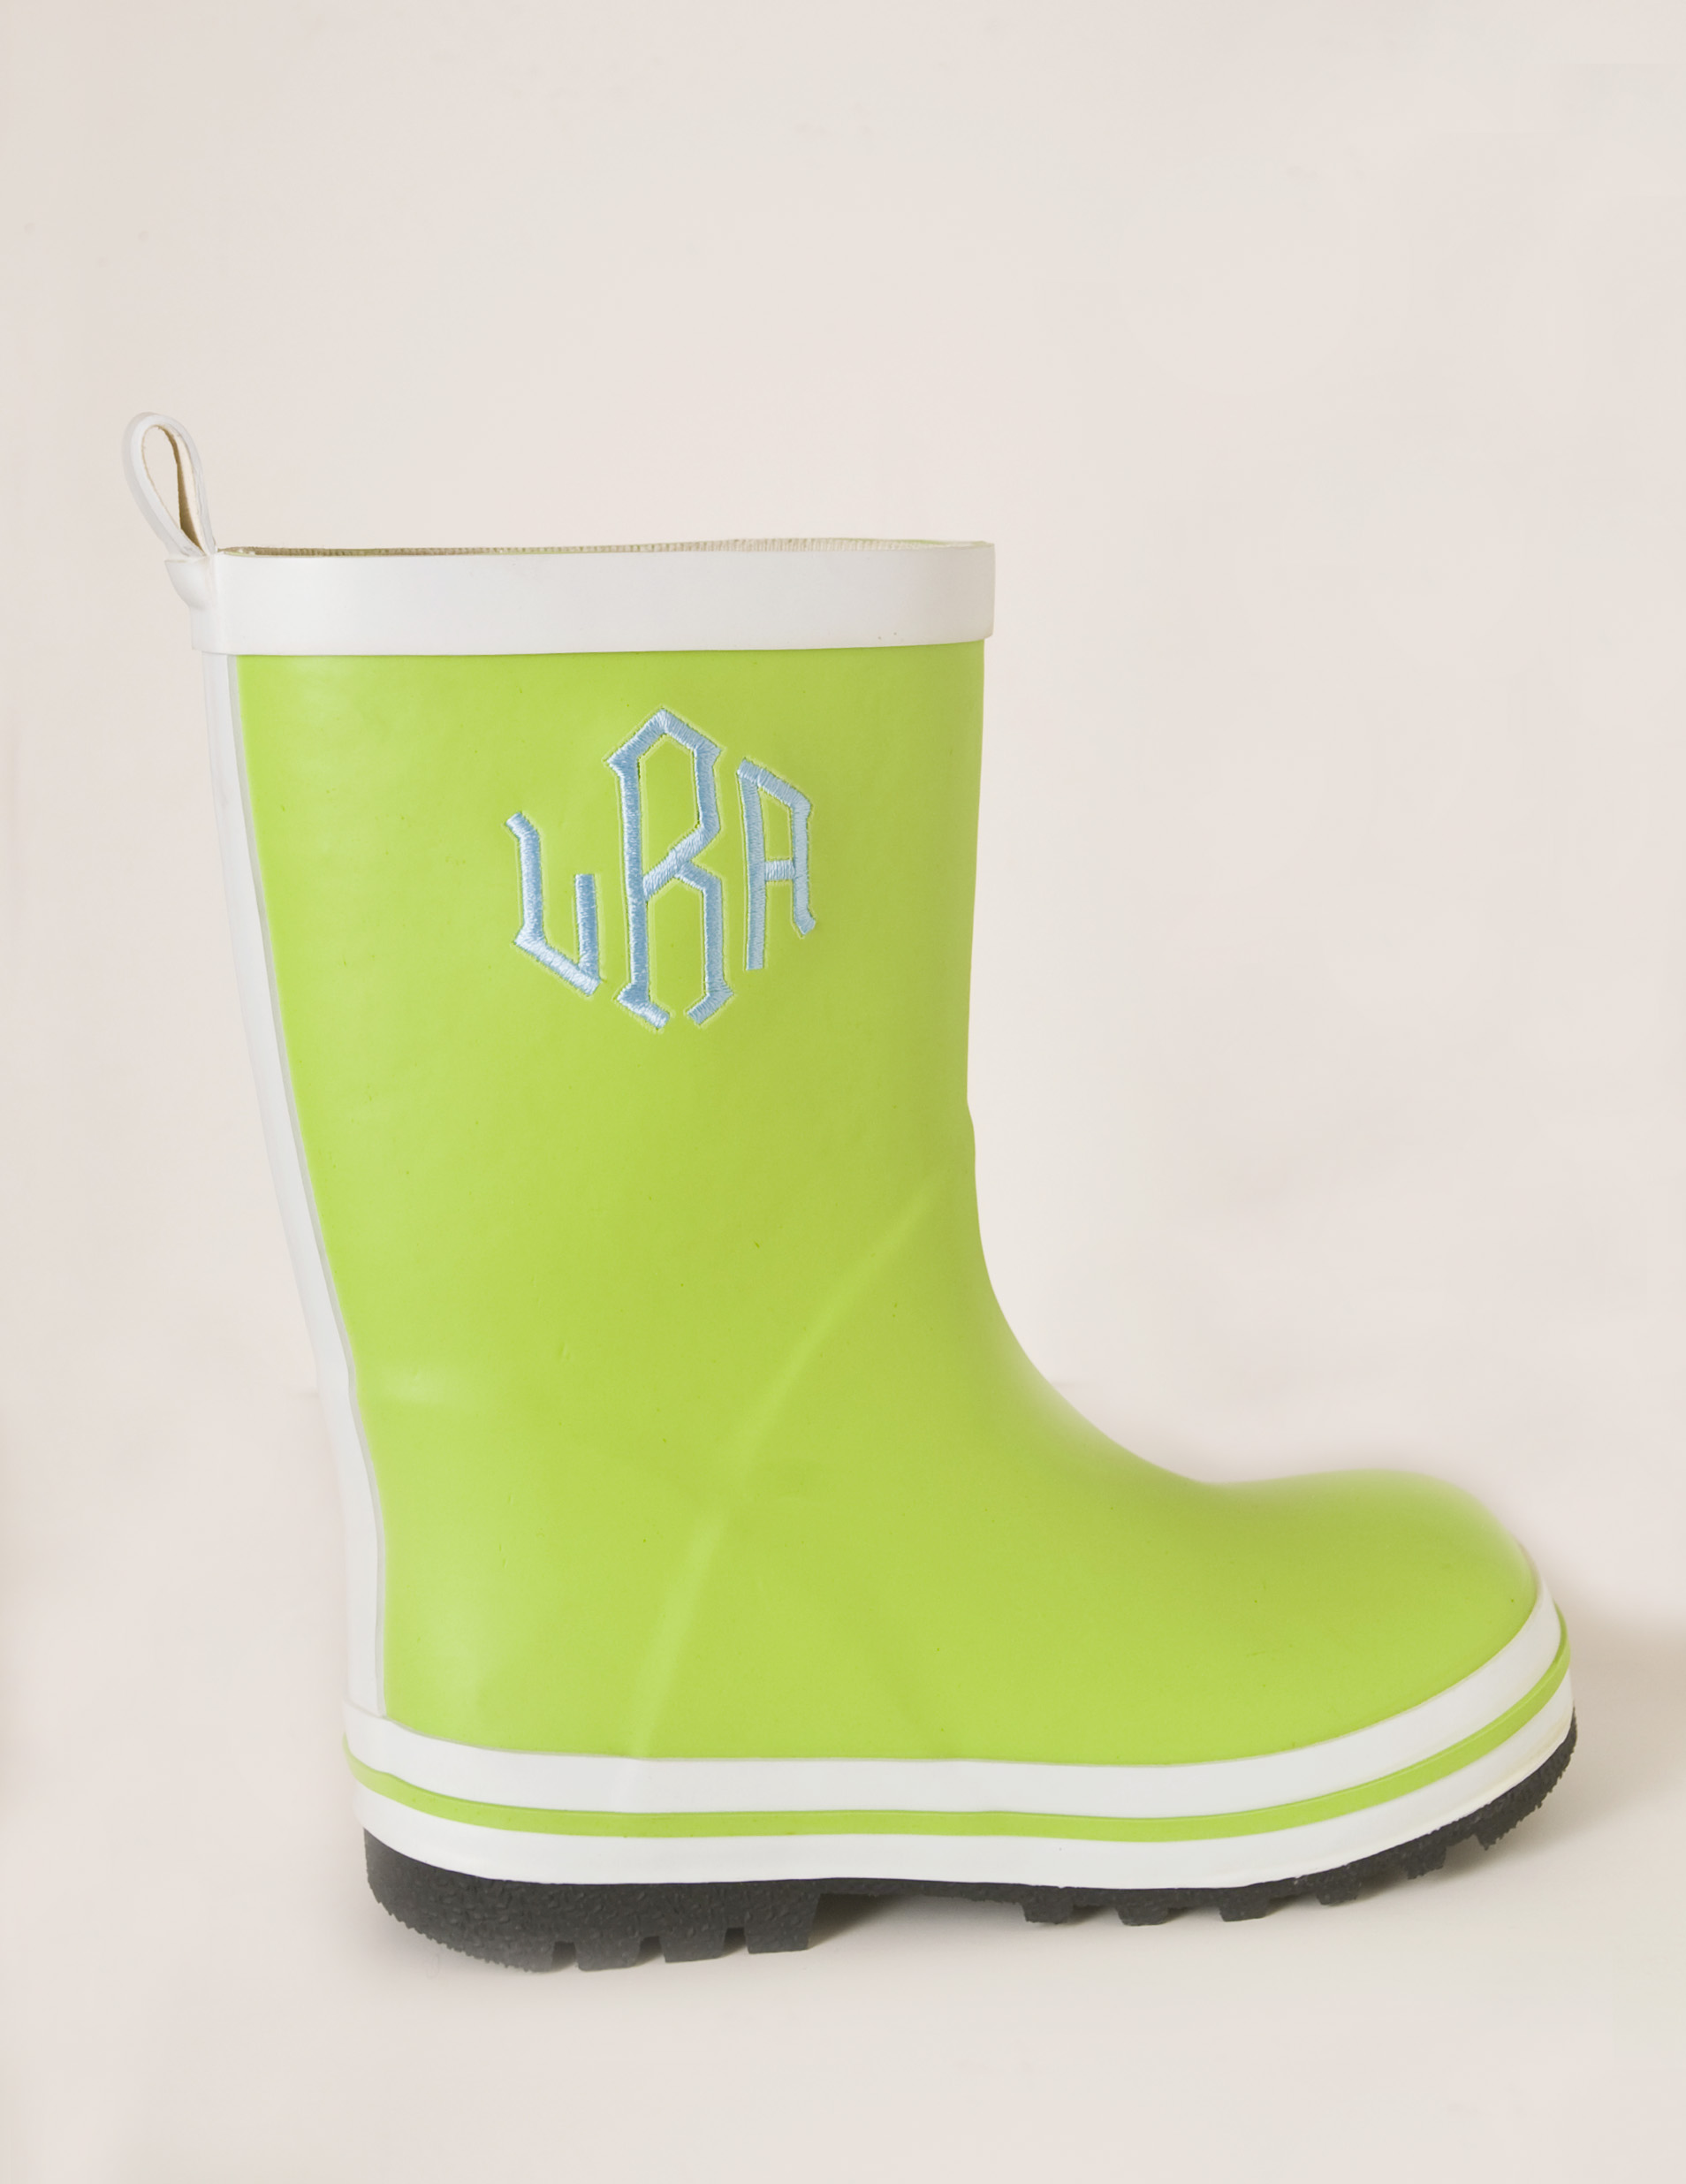 Zoubaby Monogrammed Kids Boots in Lime Green